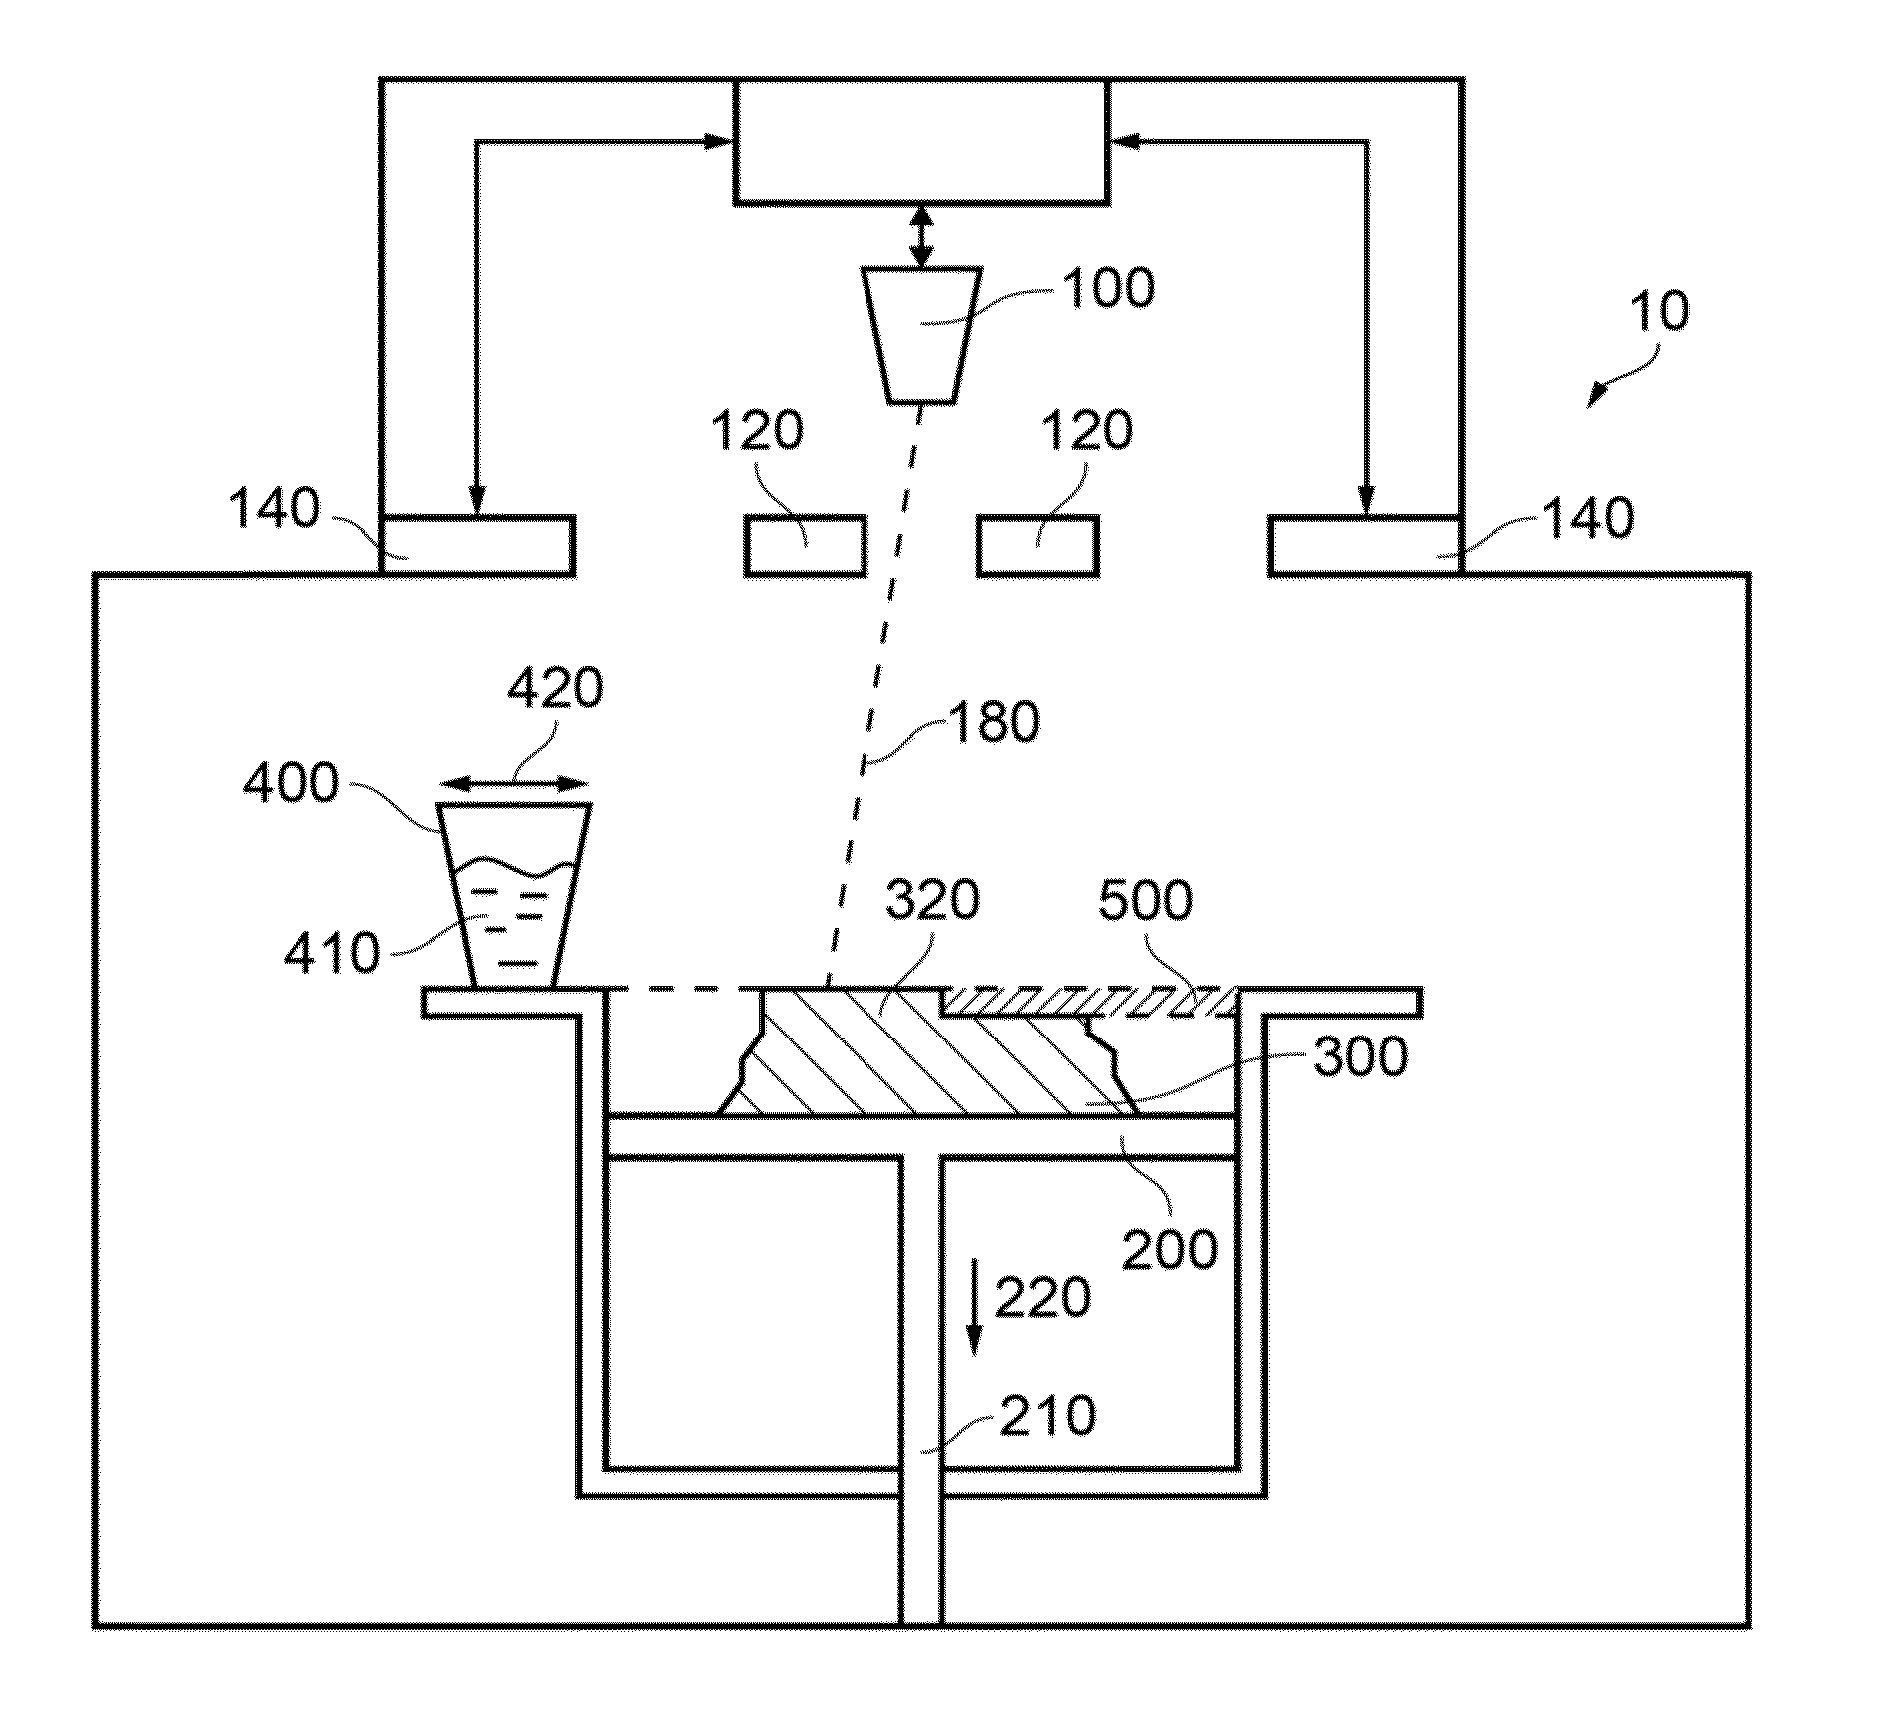 Method of manufacturing a component